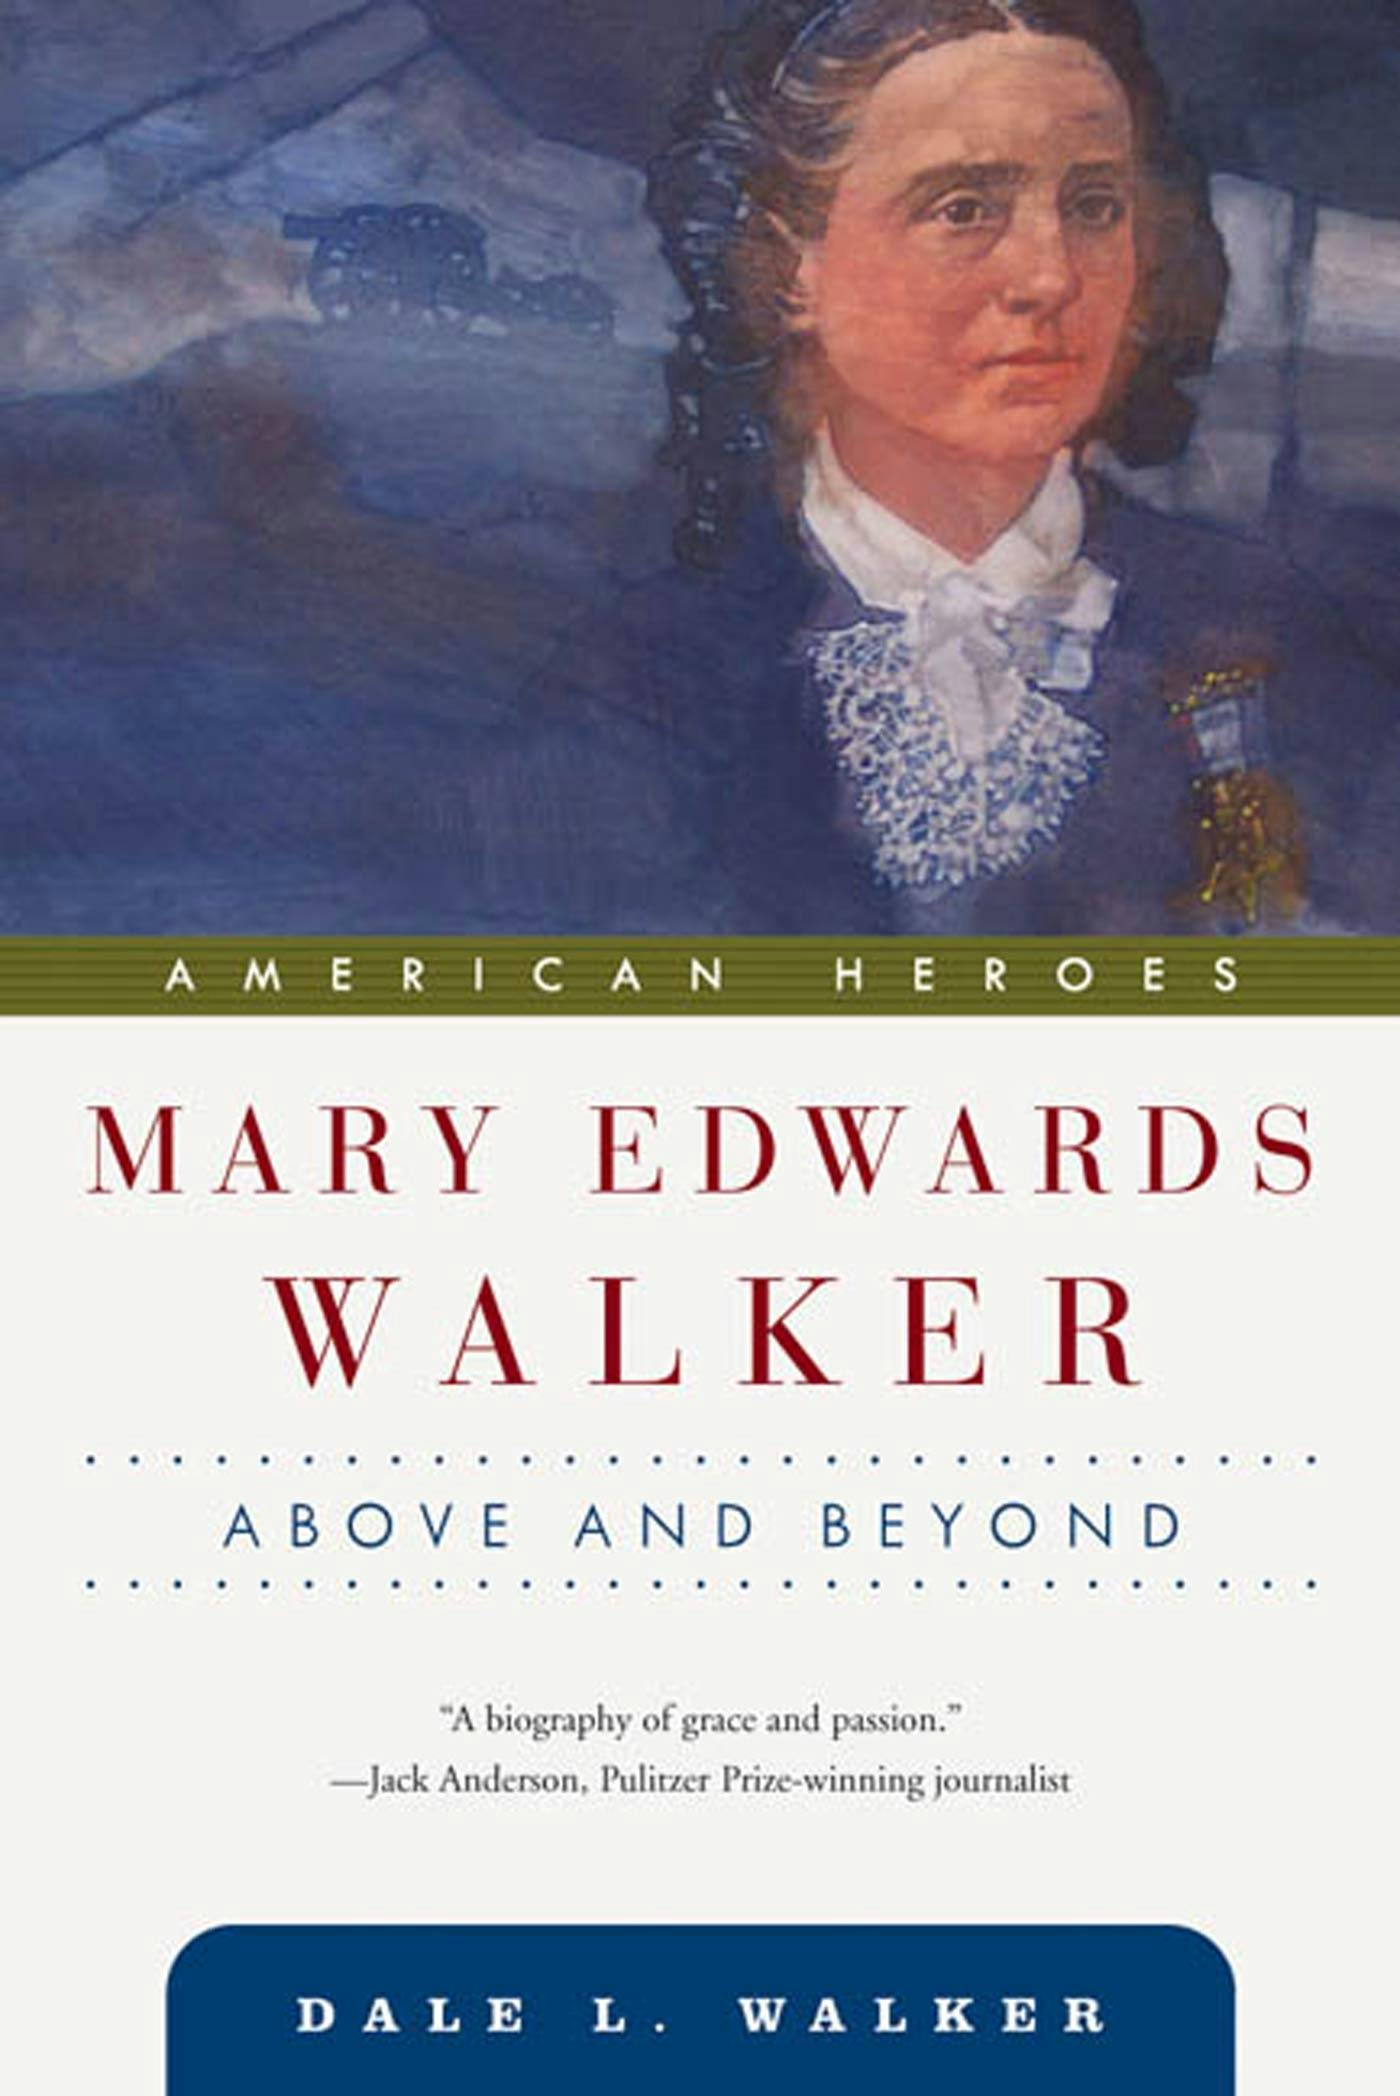 Cover for the book titled as: Mary Edwards Walker